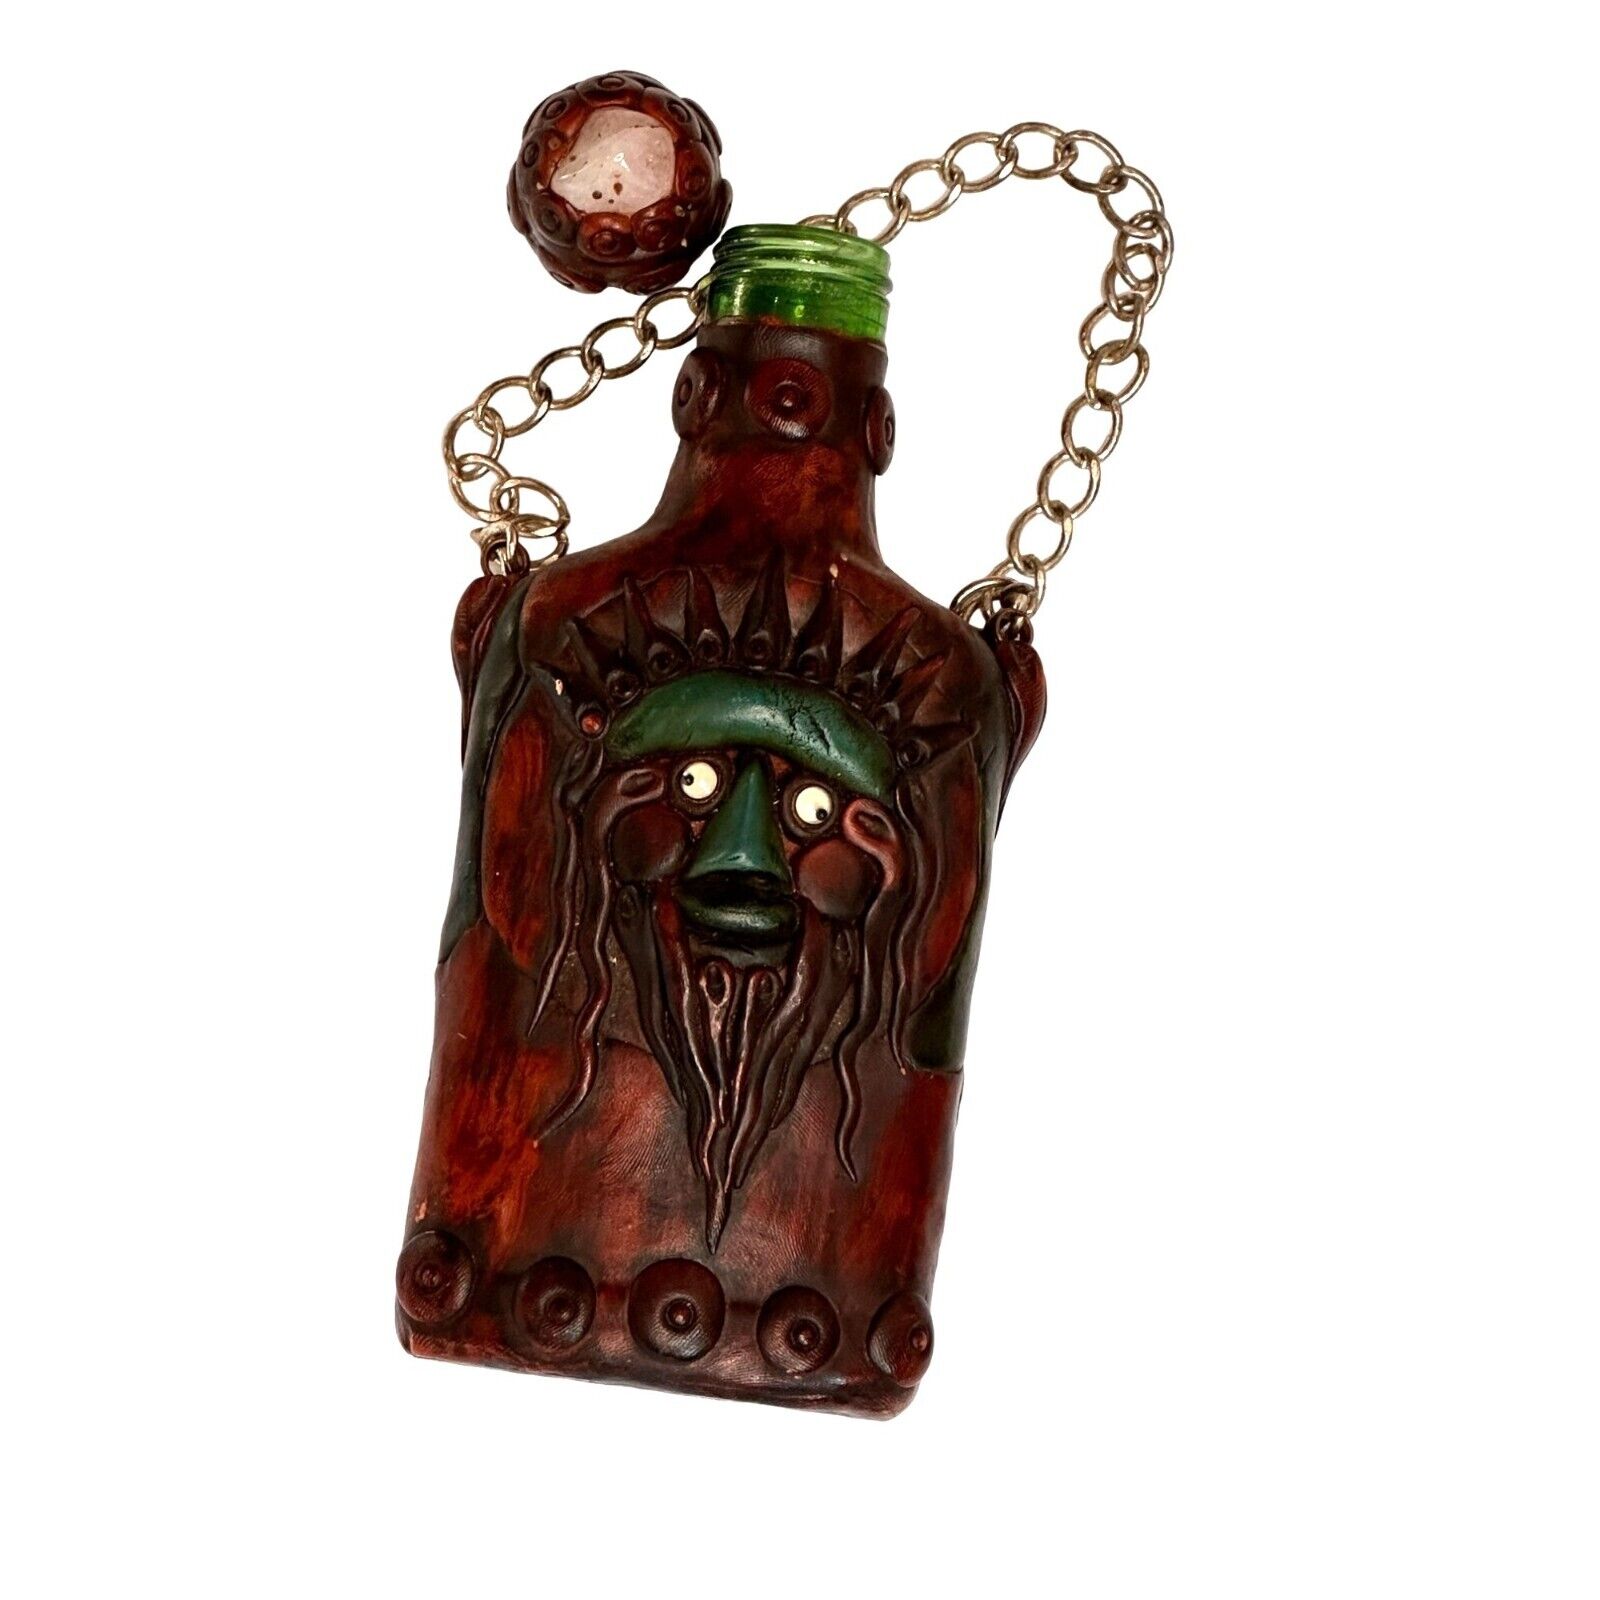 Wise Old Man Googly Eyes Unique Whimsical Storyteller Flask Decanter